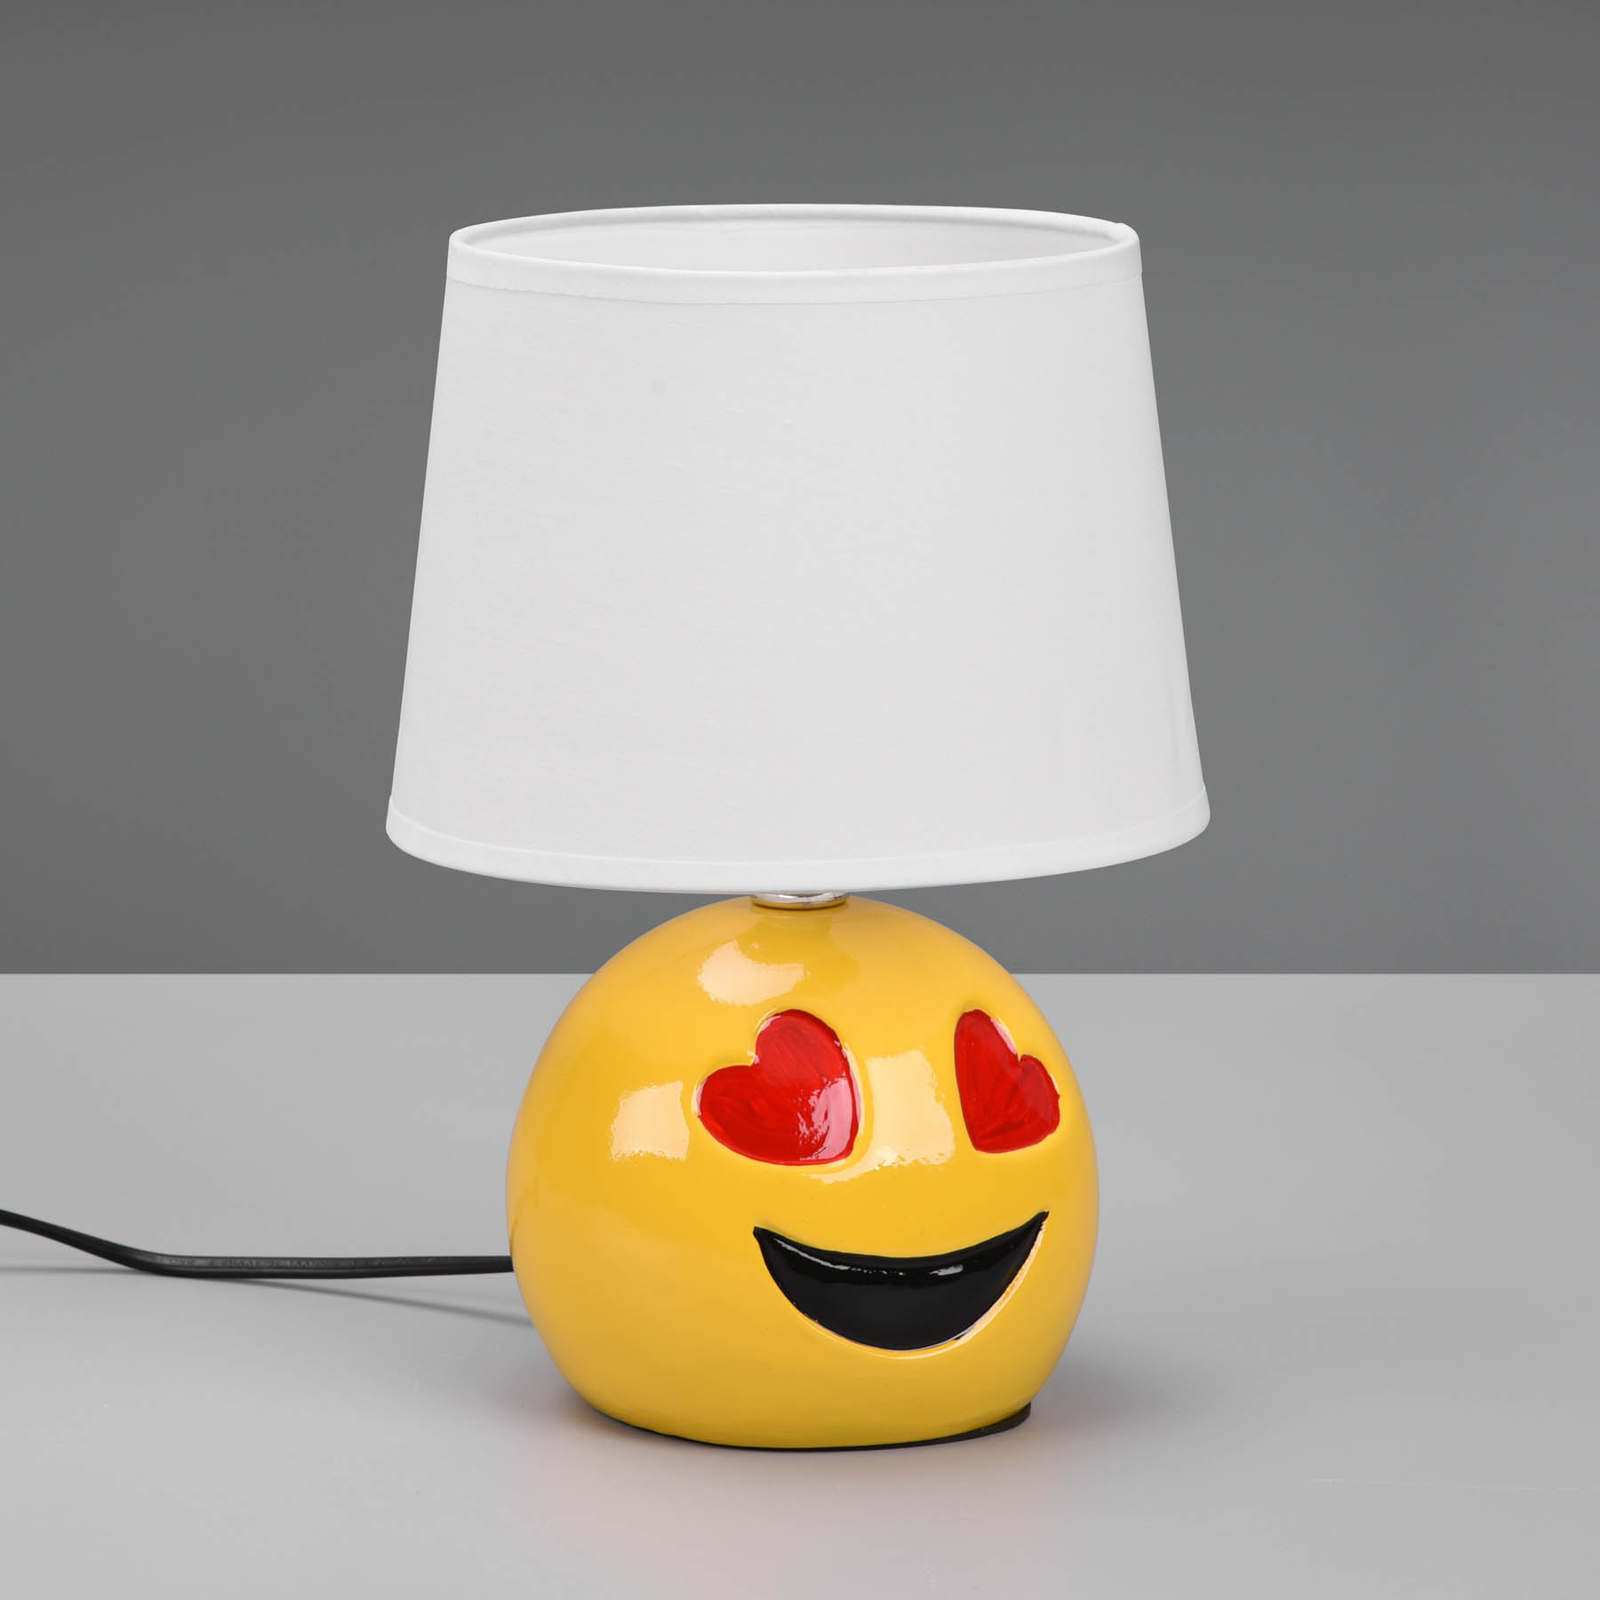 Lovely table lamp, smiley face, white lampshade